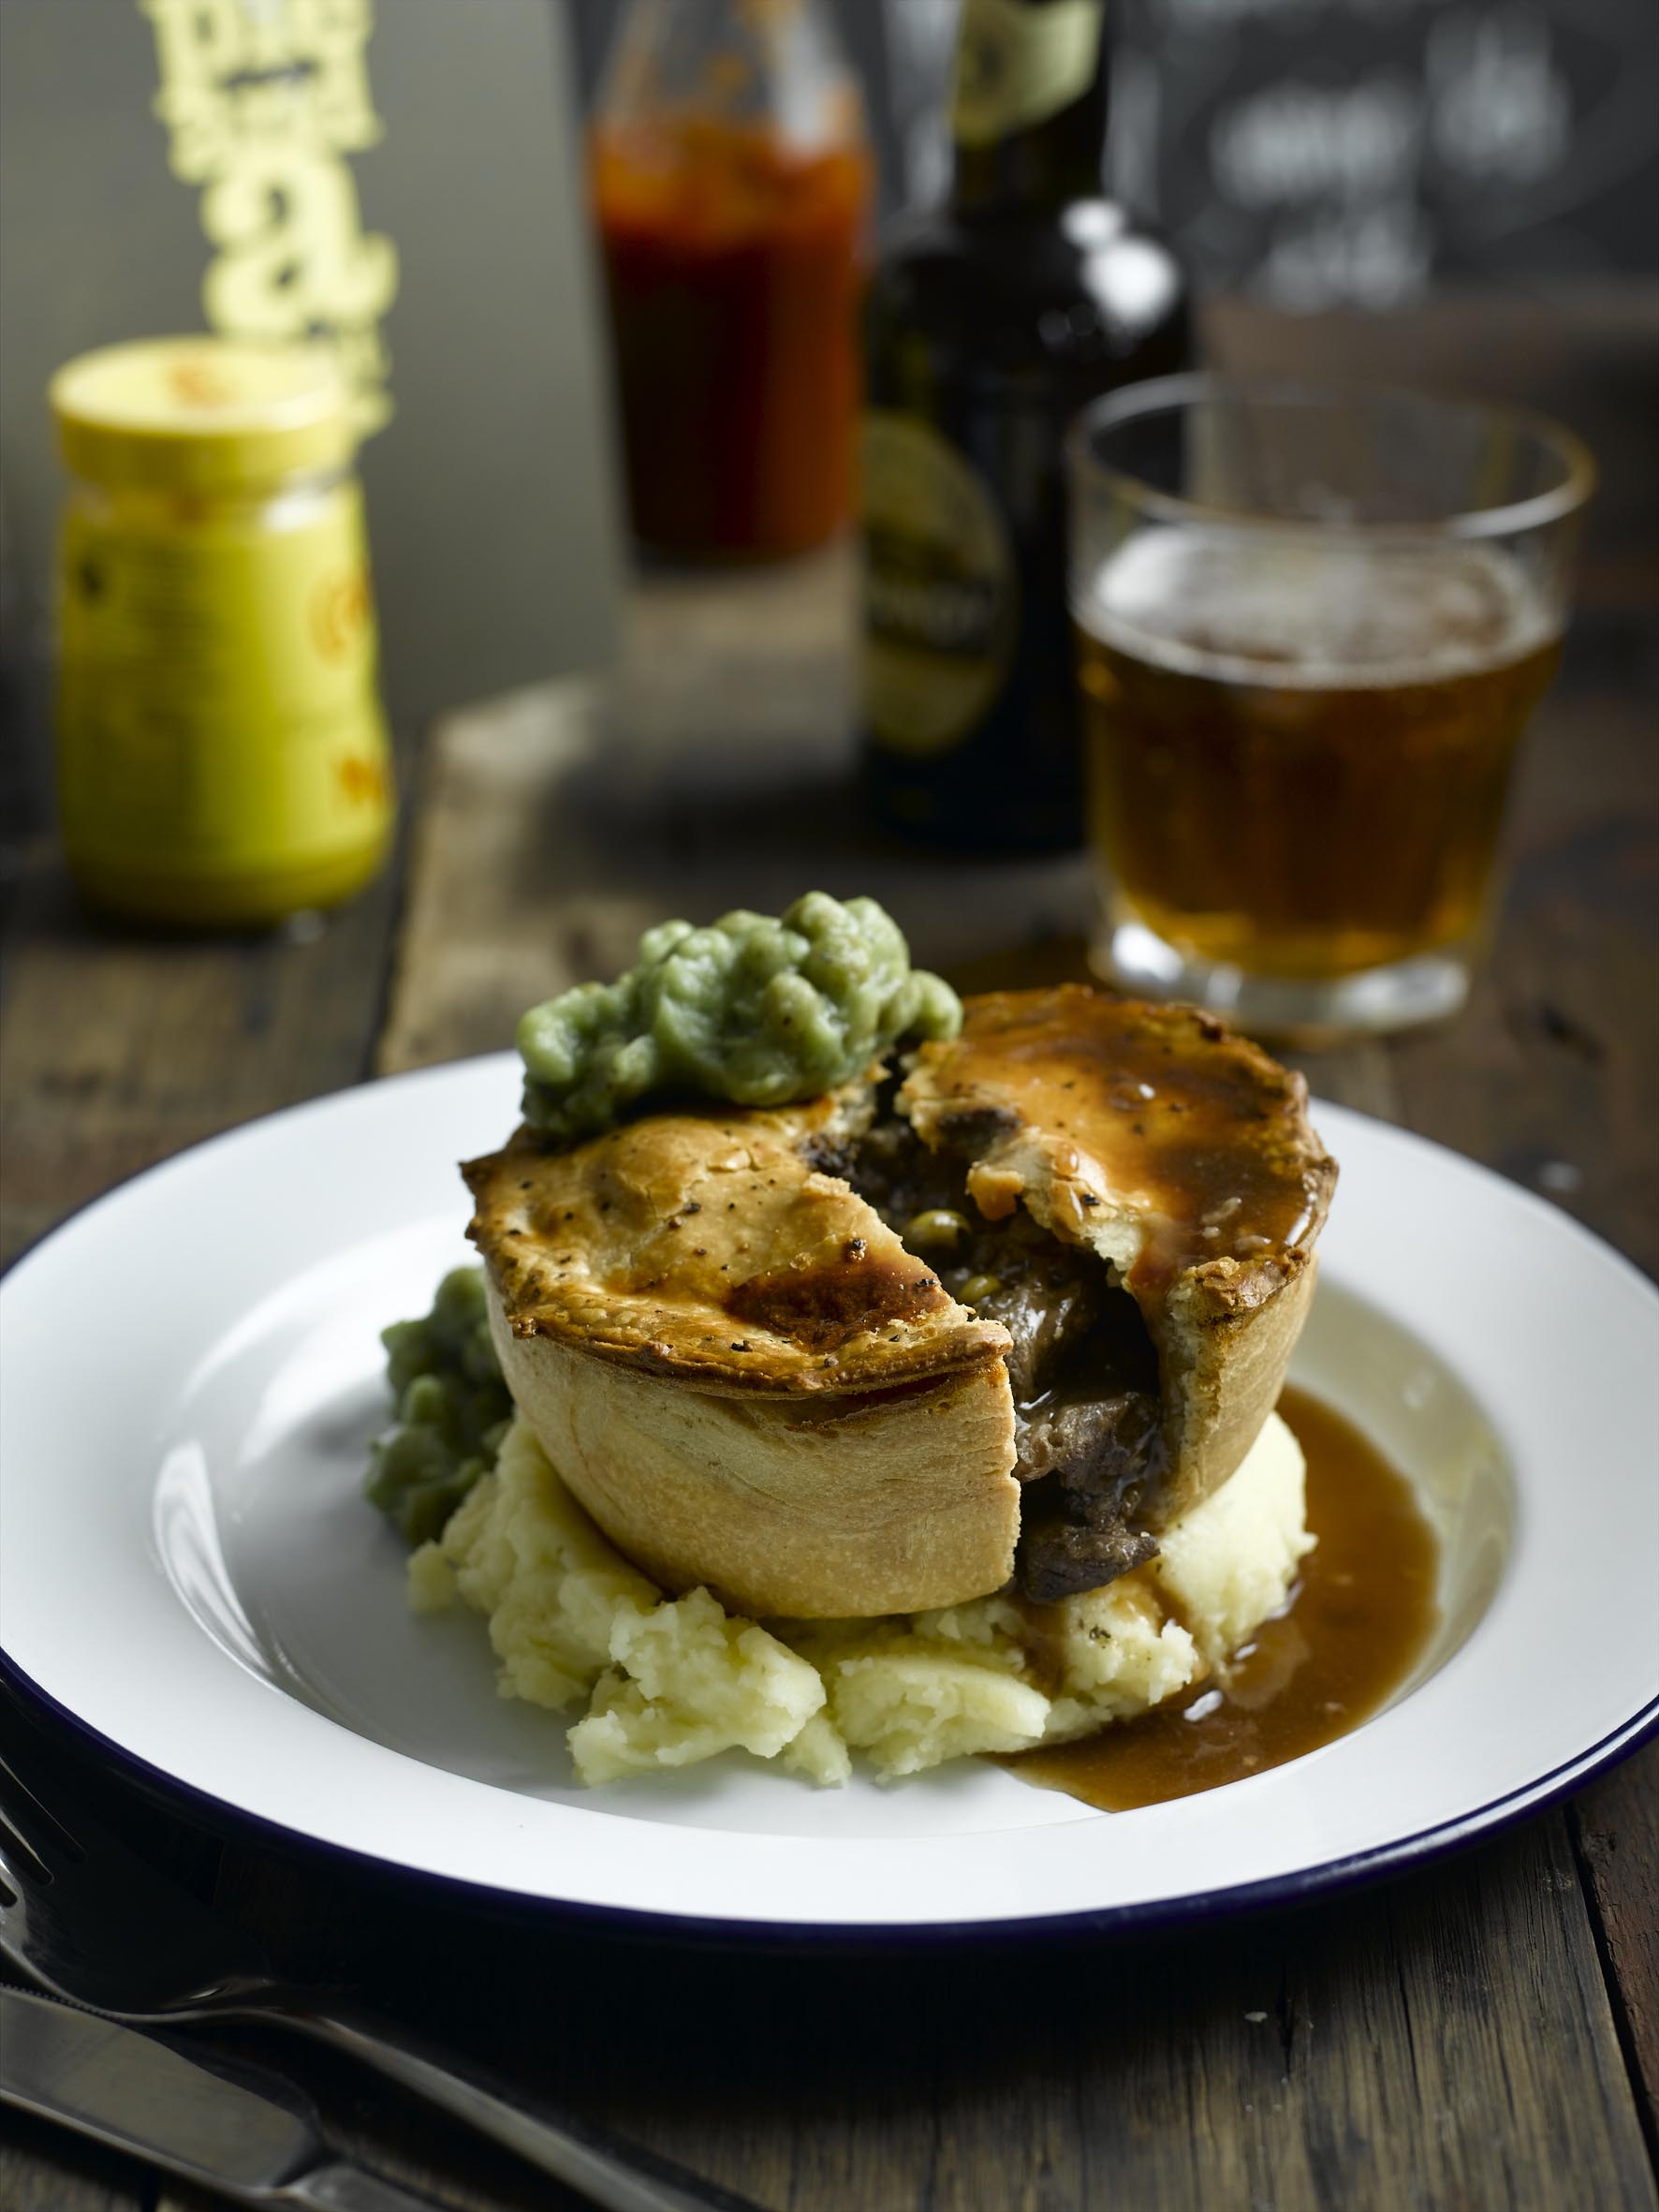 The Plough - famous for its Pies